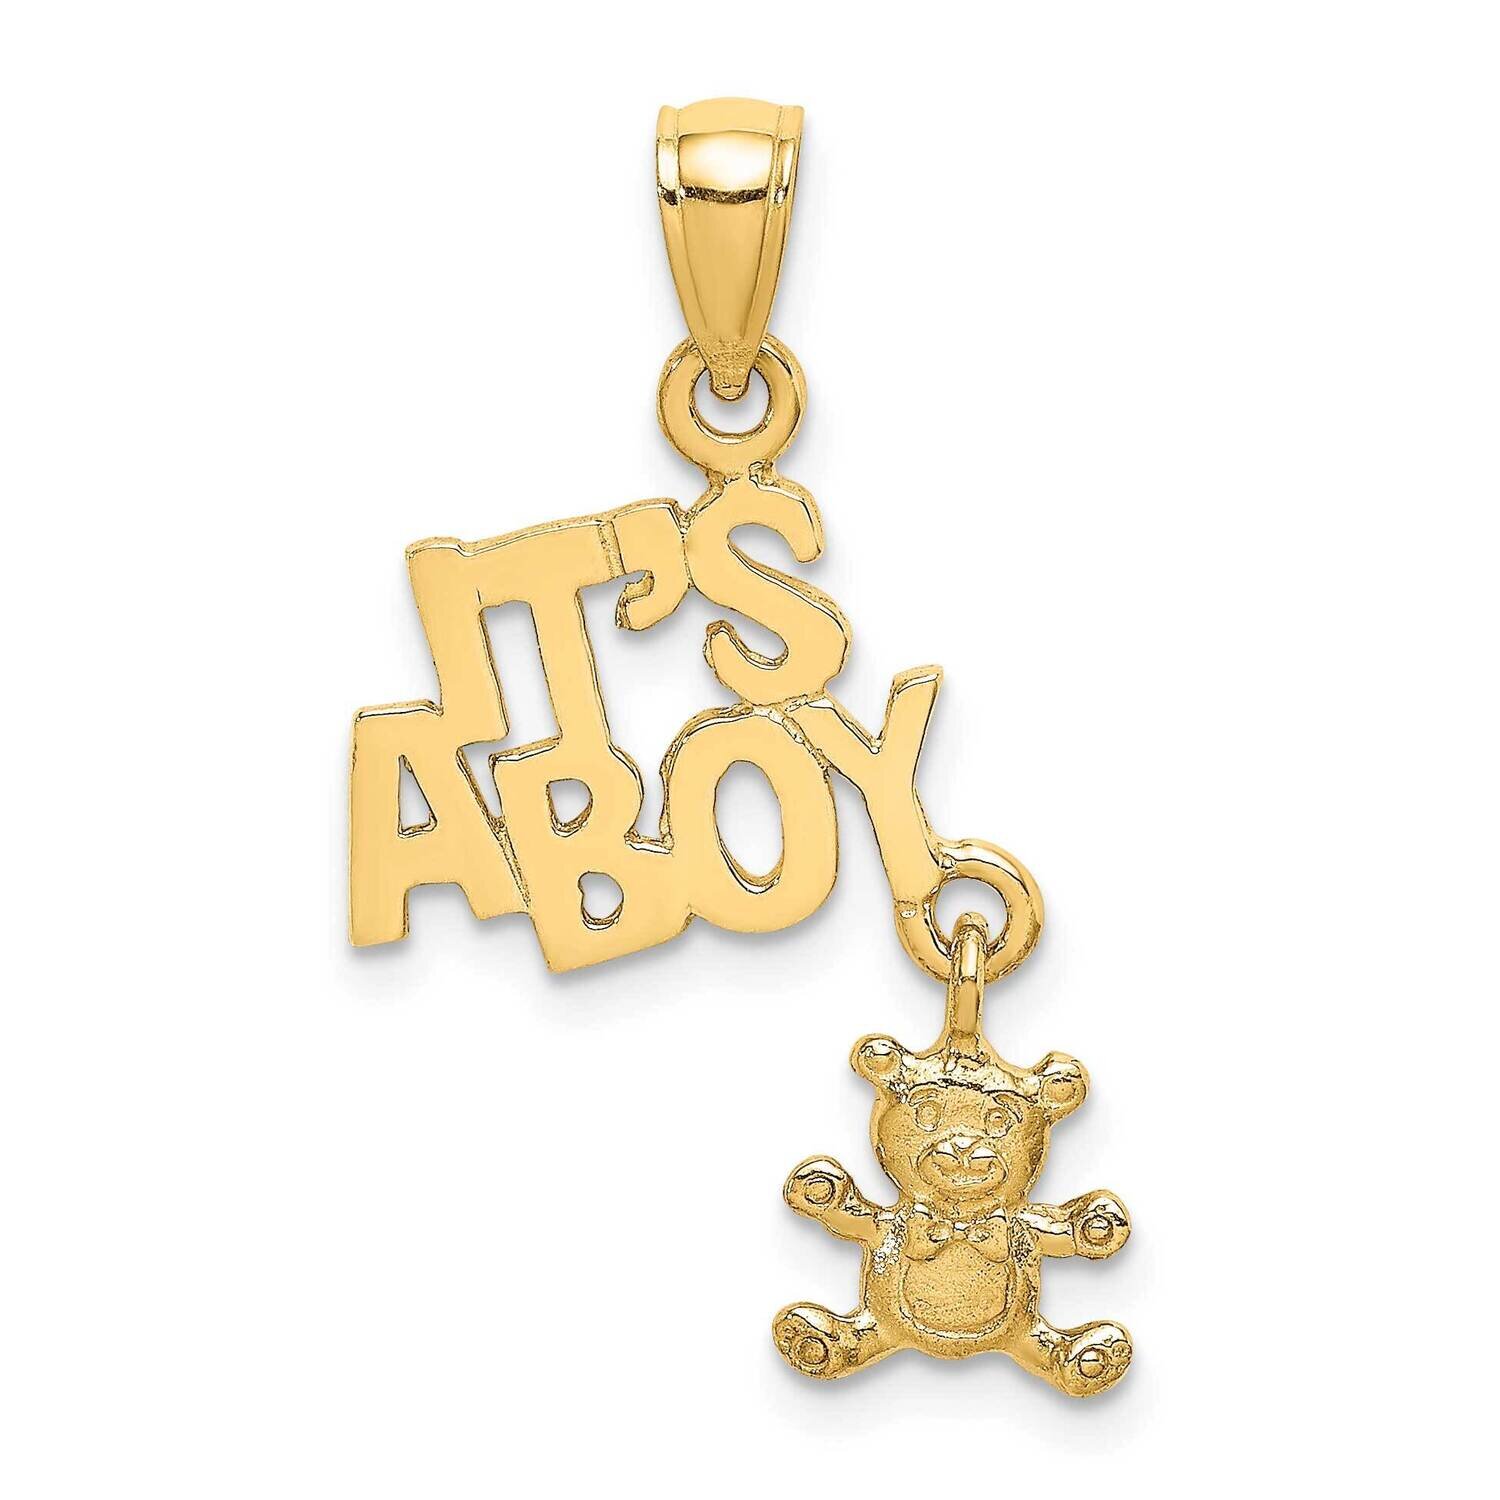 Moveable It'S A Boy with Teddy Bear Charm 14k Gold K8827